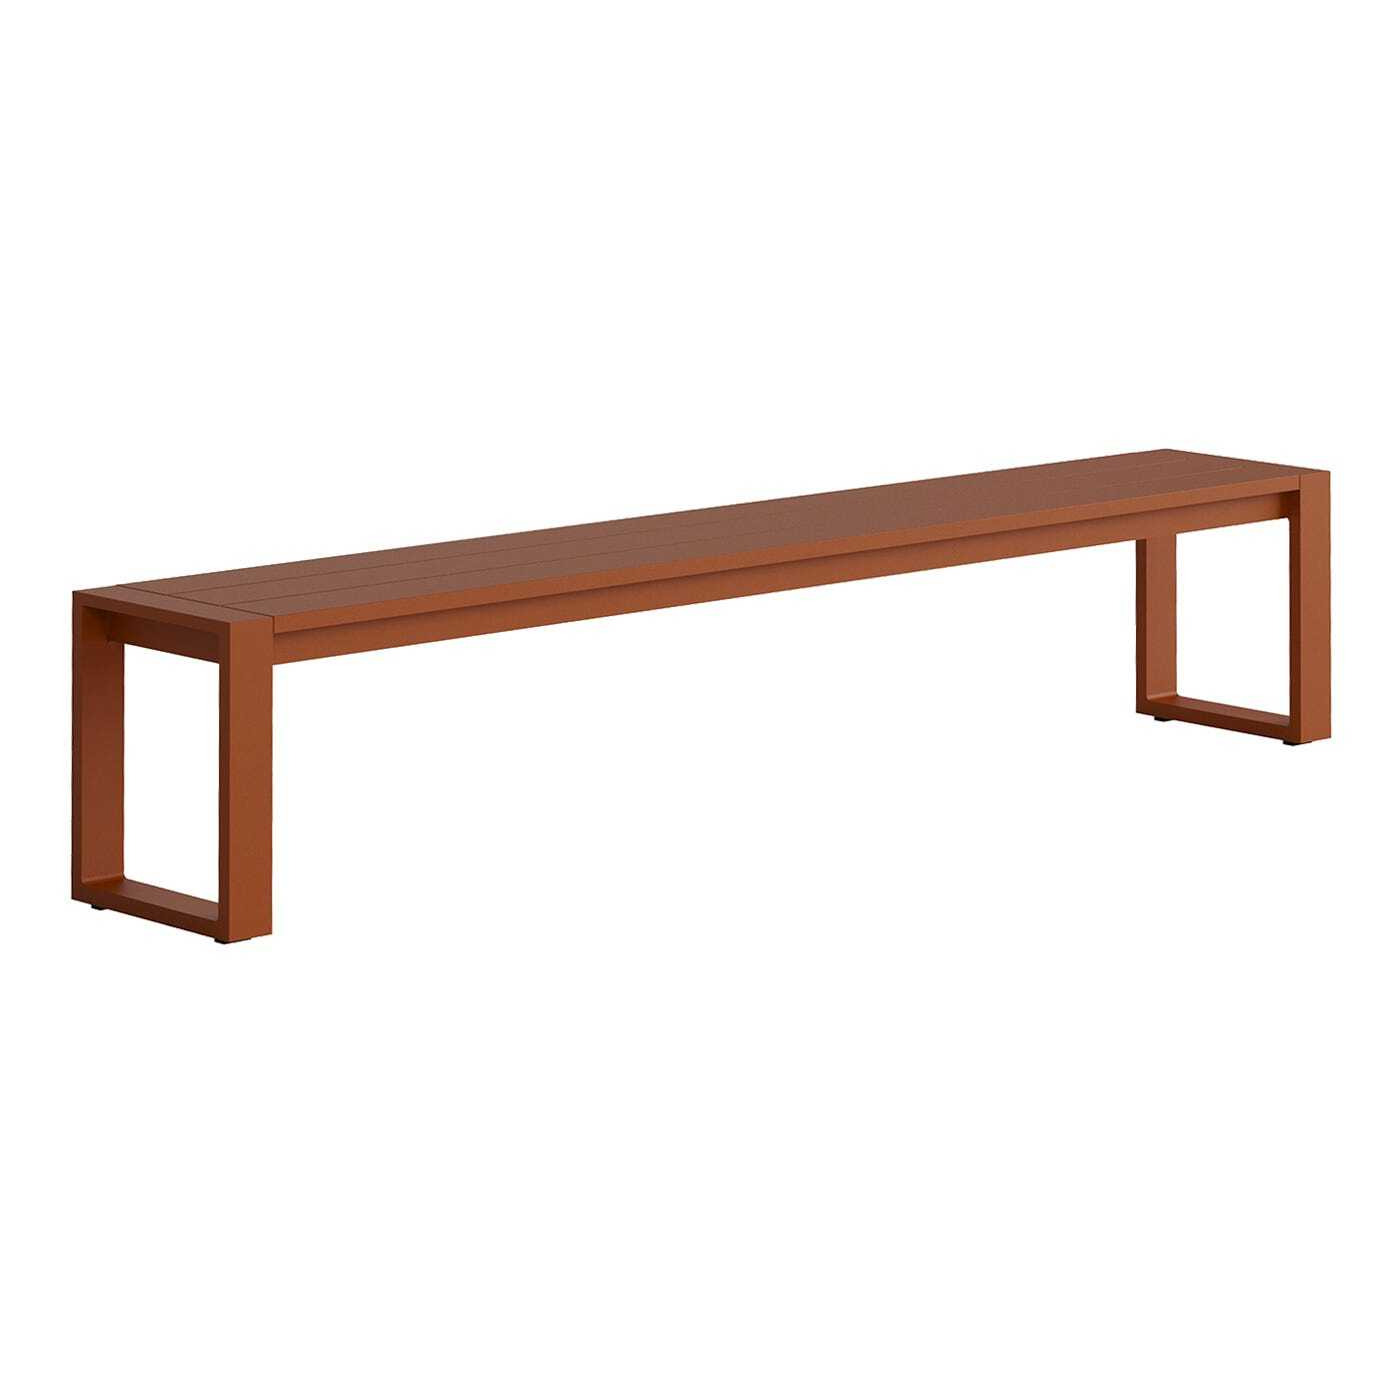 Case Eos Communal Outdoor Bench Rust - image 1